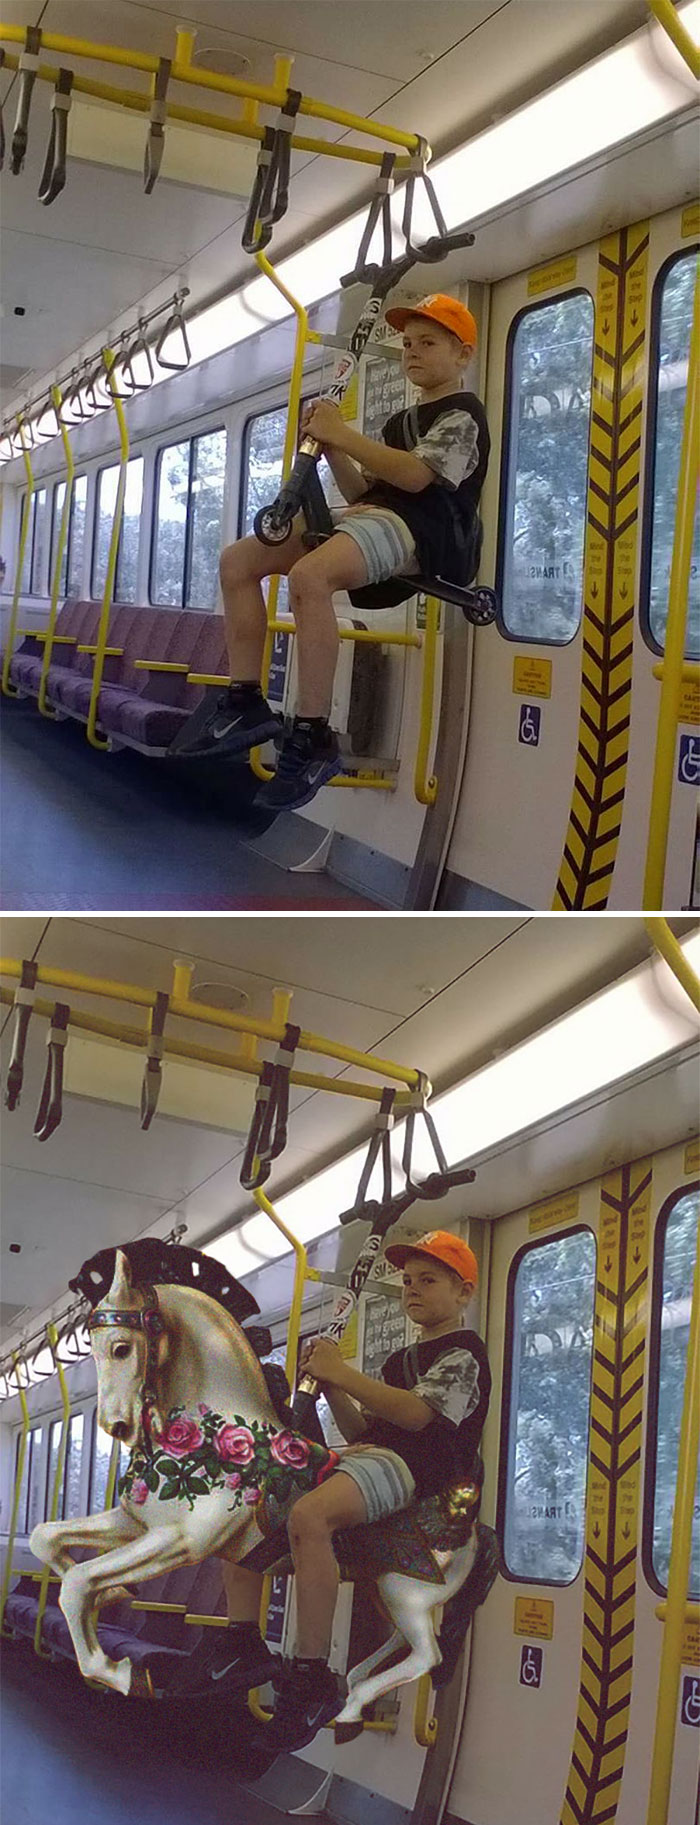 This Kid Riding His Scooter On The Train